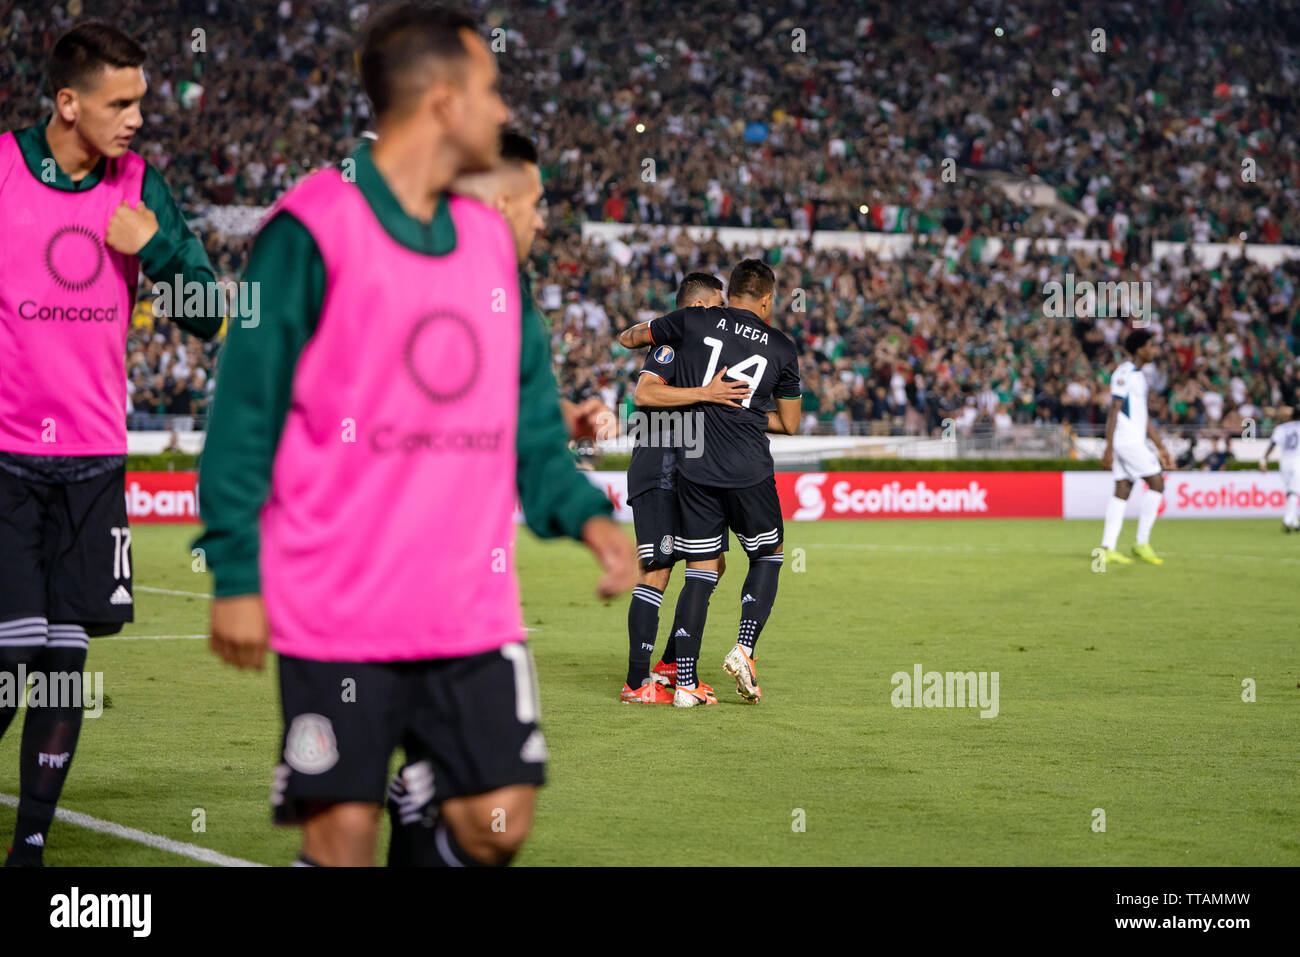 Pasadena, USA. 15th June, 2019. Alexis Vega (14) celebrates after scoring Mexico's sixth goal of the game in their Gold Cup opener against Cuba. Credit: Ben Nichols/Alamy Live News Stock Photo